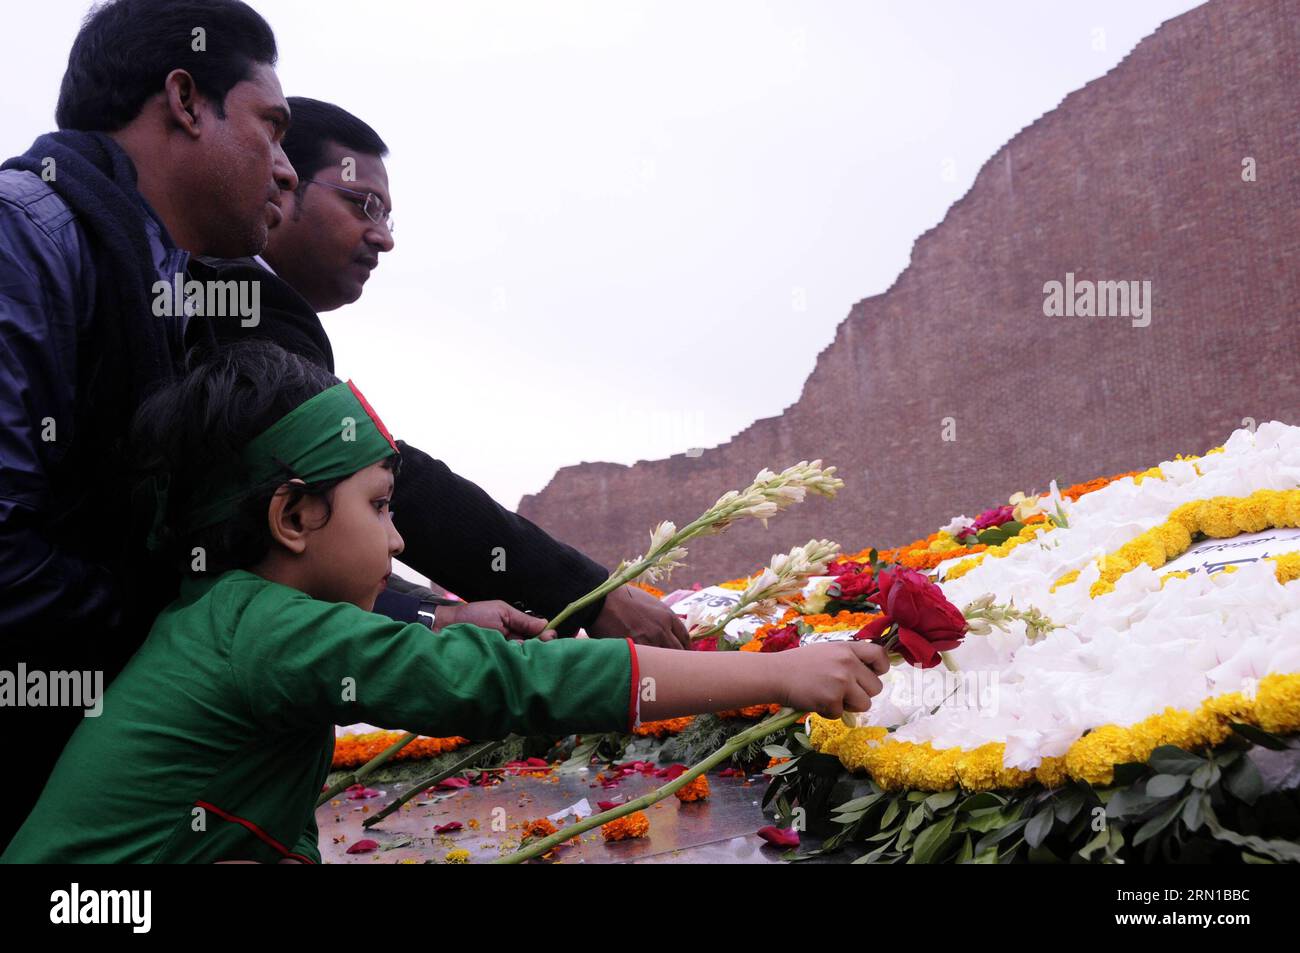 (141214) -- DHAKA, Dec. 14, 2014 -- Bangladeshi people pay tribute with flowers in front of the Martyred Intellectual Memorial on Martyred Intellectuals Day at Rayerbazar in Dhaka, Bangladesh, Dec. 14, 2014. Bangladesh observed Martyred Intellectuals Day in commemoration of the martyrdom of the members of the intelligentsia who were assassinated at fag end of Bangladesh liberation war. The victims of this genocide were mostly eminent academicians, litterateurs, doctors, engineers, journalists and other notable personalities. ) (lyi) BANGLADESH-DHAKA-MARTYRED INTELLECTUALS DAY SharifulxIslam PU Stock Photo